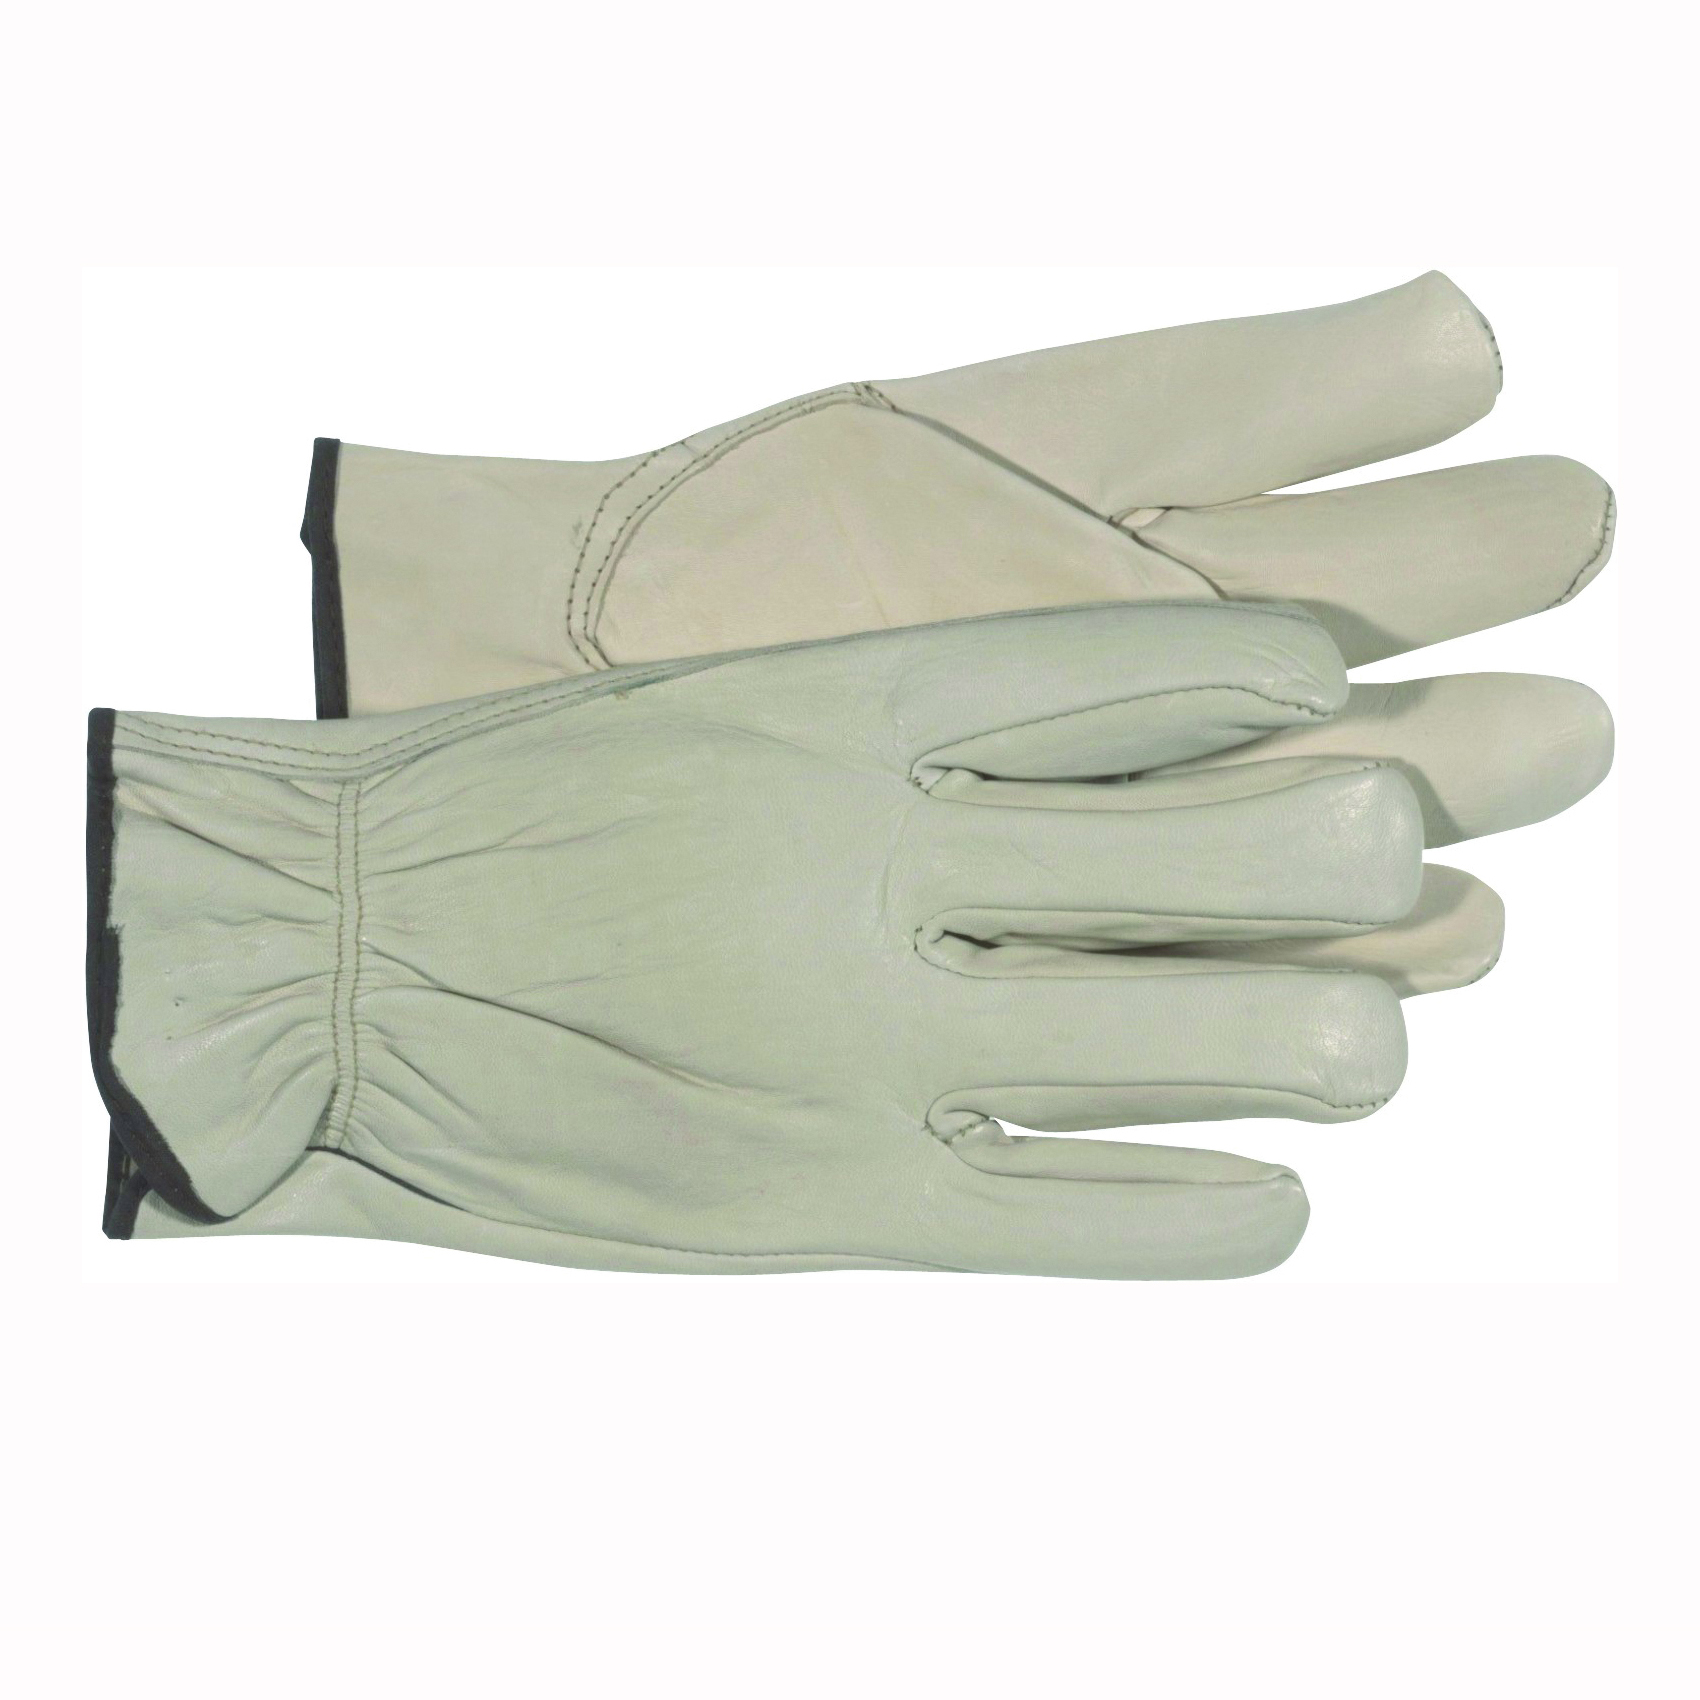 4068M Driver Gloves, M, Keystone Thumb, Open, Shirred Elastic Back Cuff, Leather, Natural